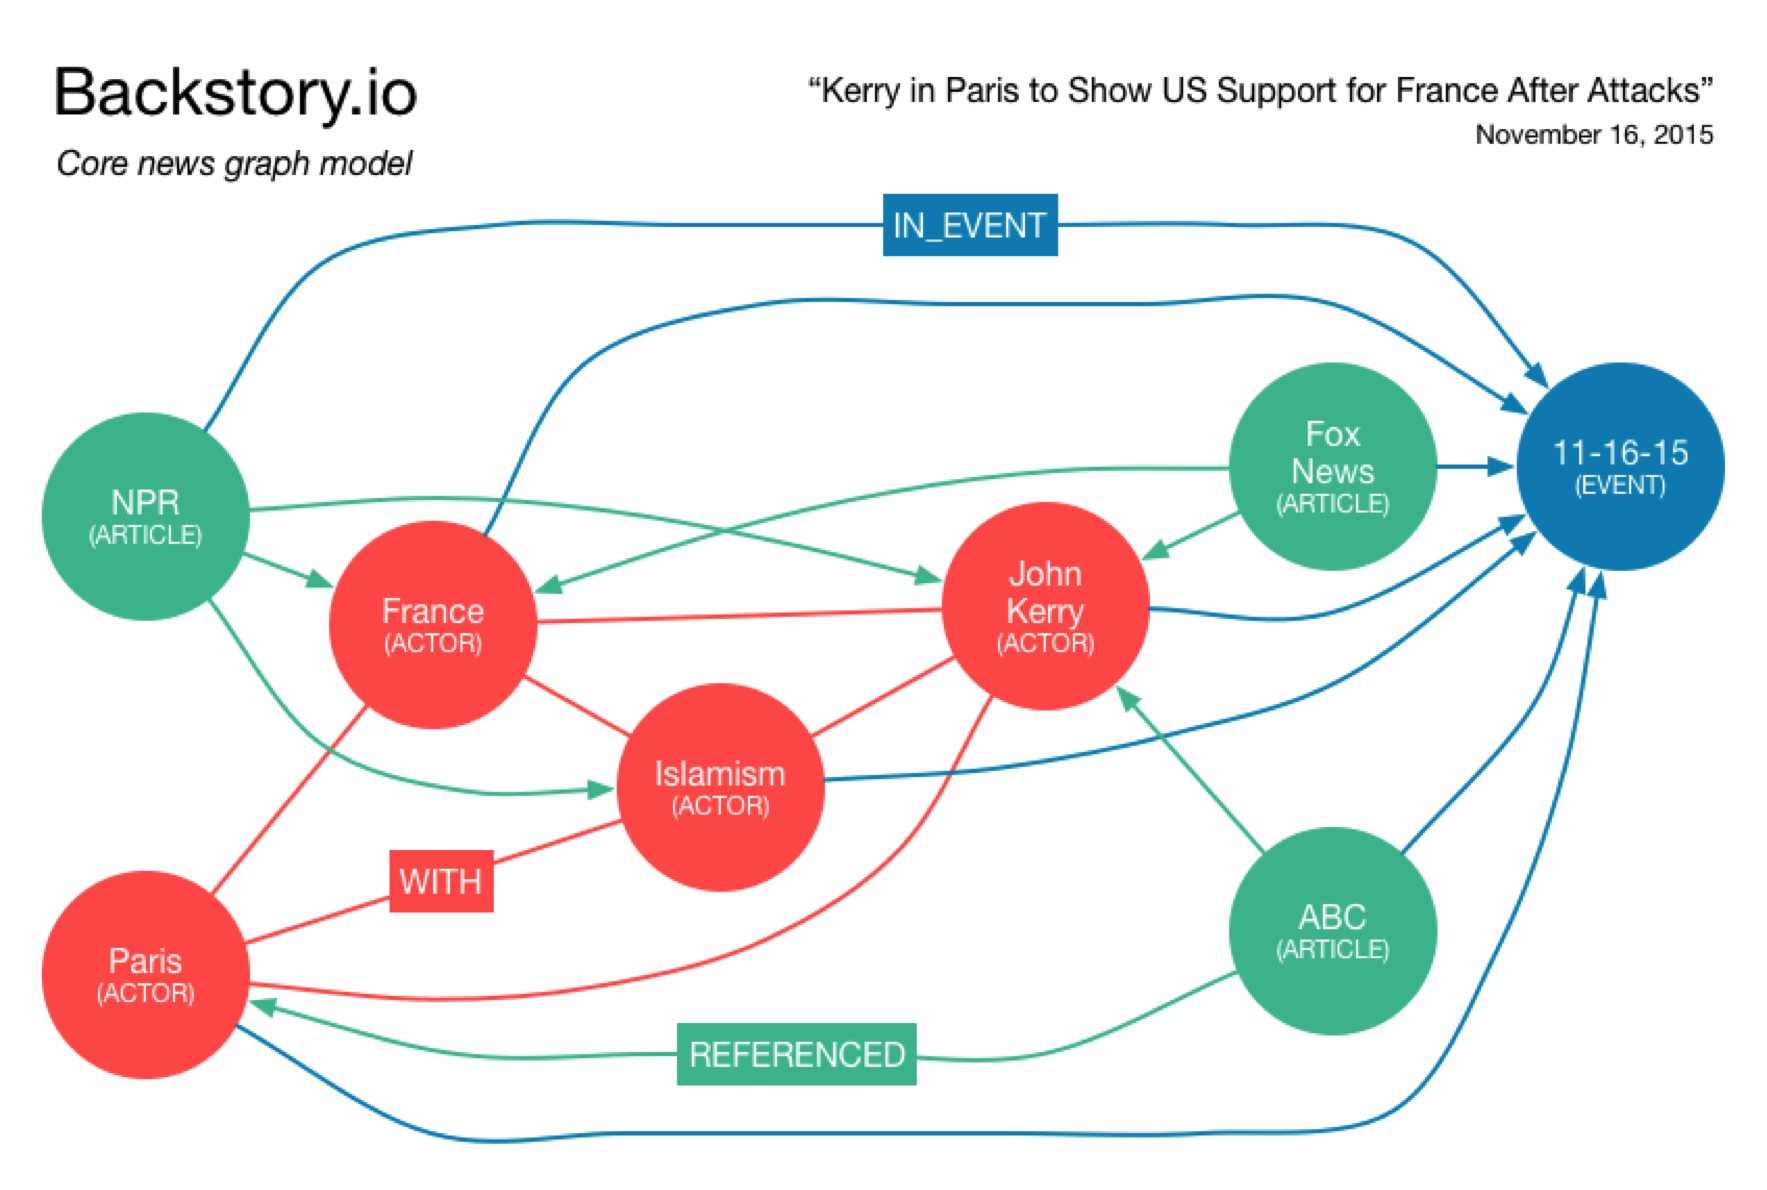 learn how backstory.io uses neo4j to graph news stories in a new way